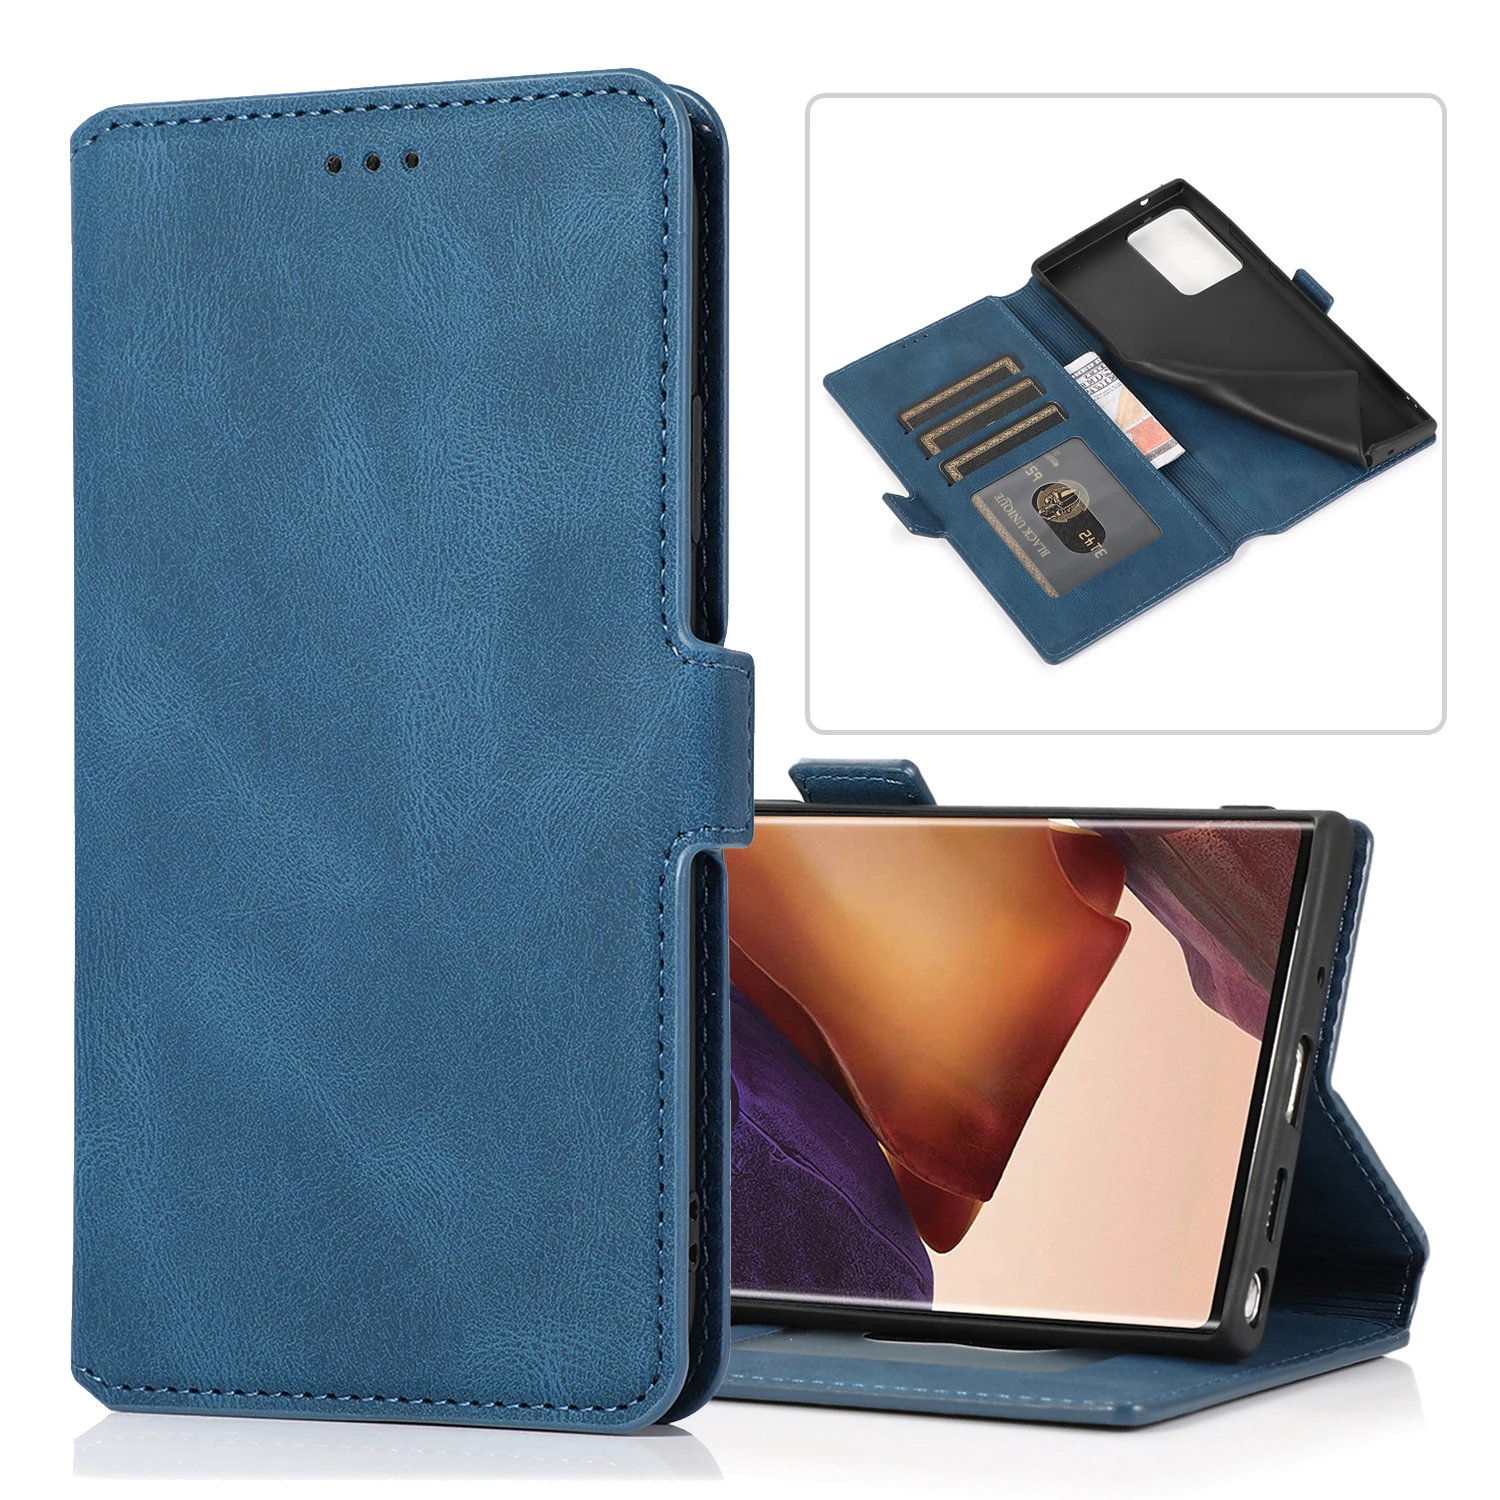 

Leather Flip Wallet Case For Samsung galaxy note8 note9 note10 10plus 10lite note20 20ultra Card Stand Slot Phone Cover Coque